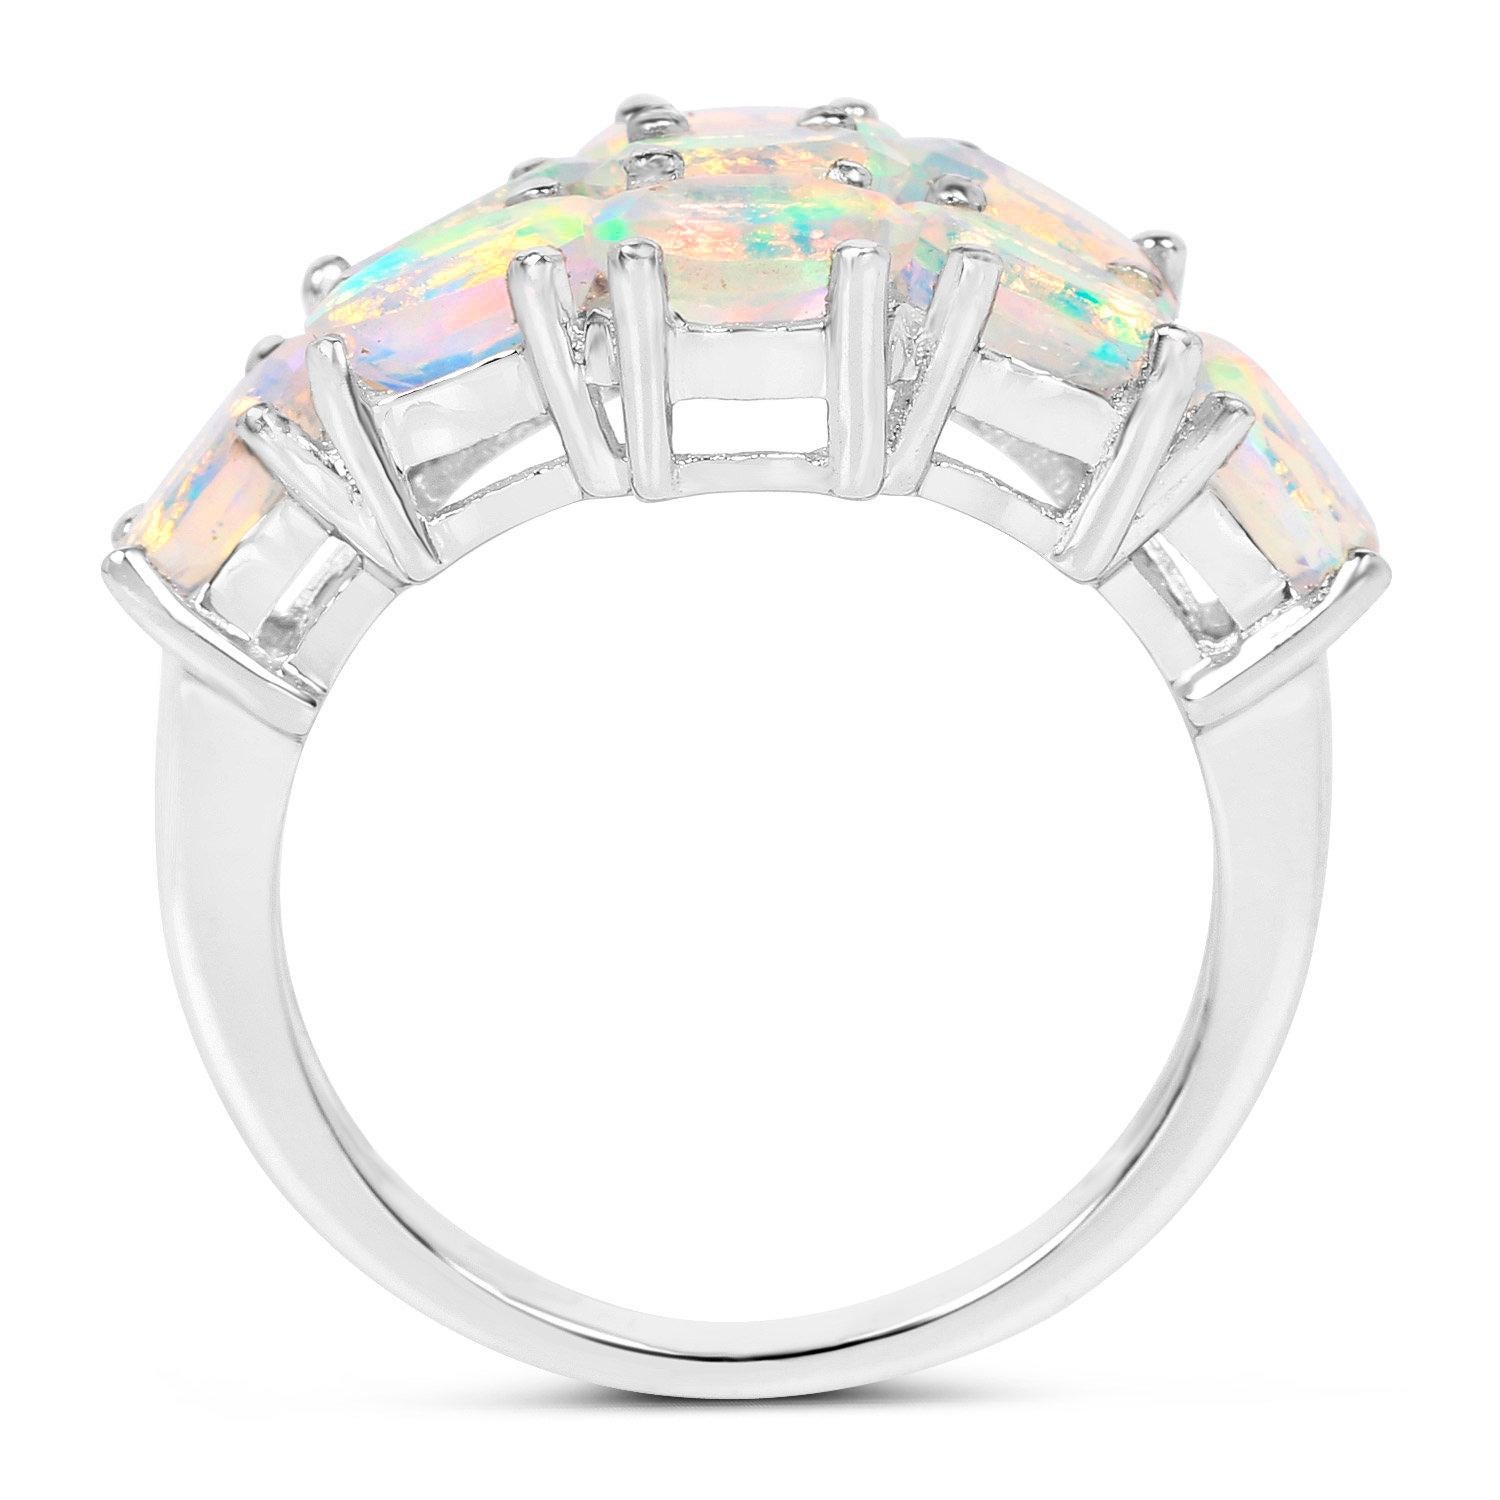 Oval Cut Faceted 2.15 Carats Ethiopian Opal Cluster Ring Sterling Silver For Sale